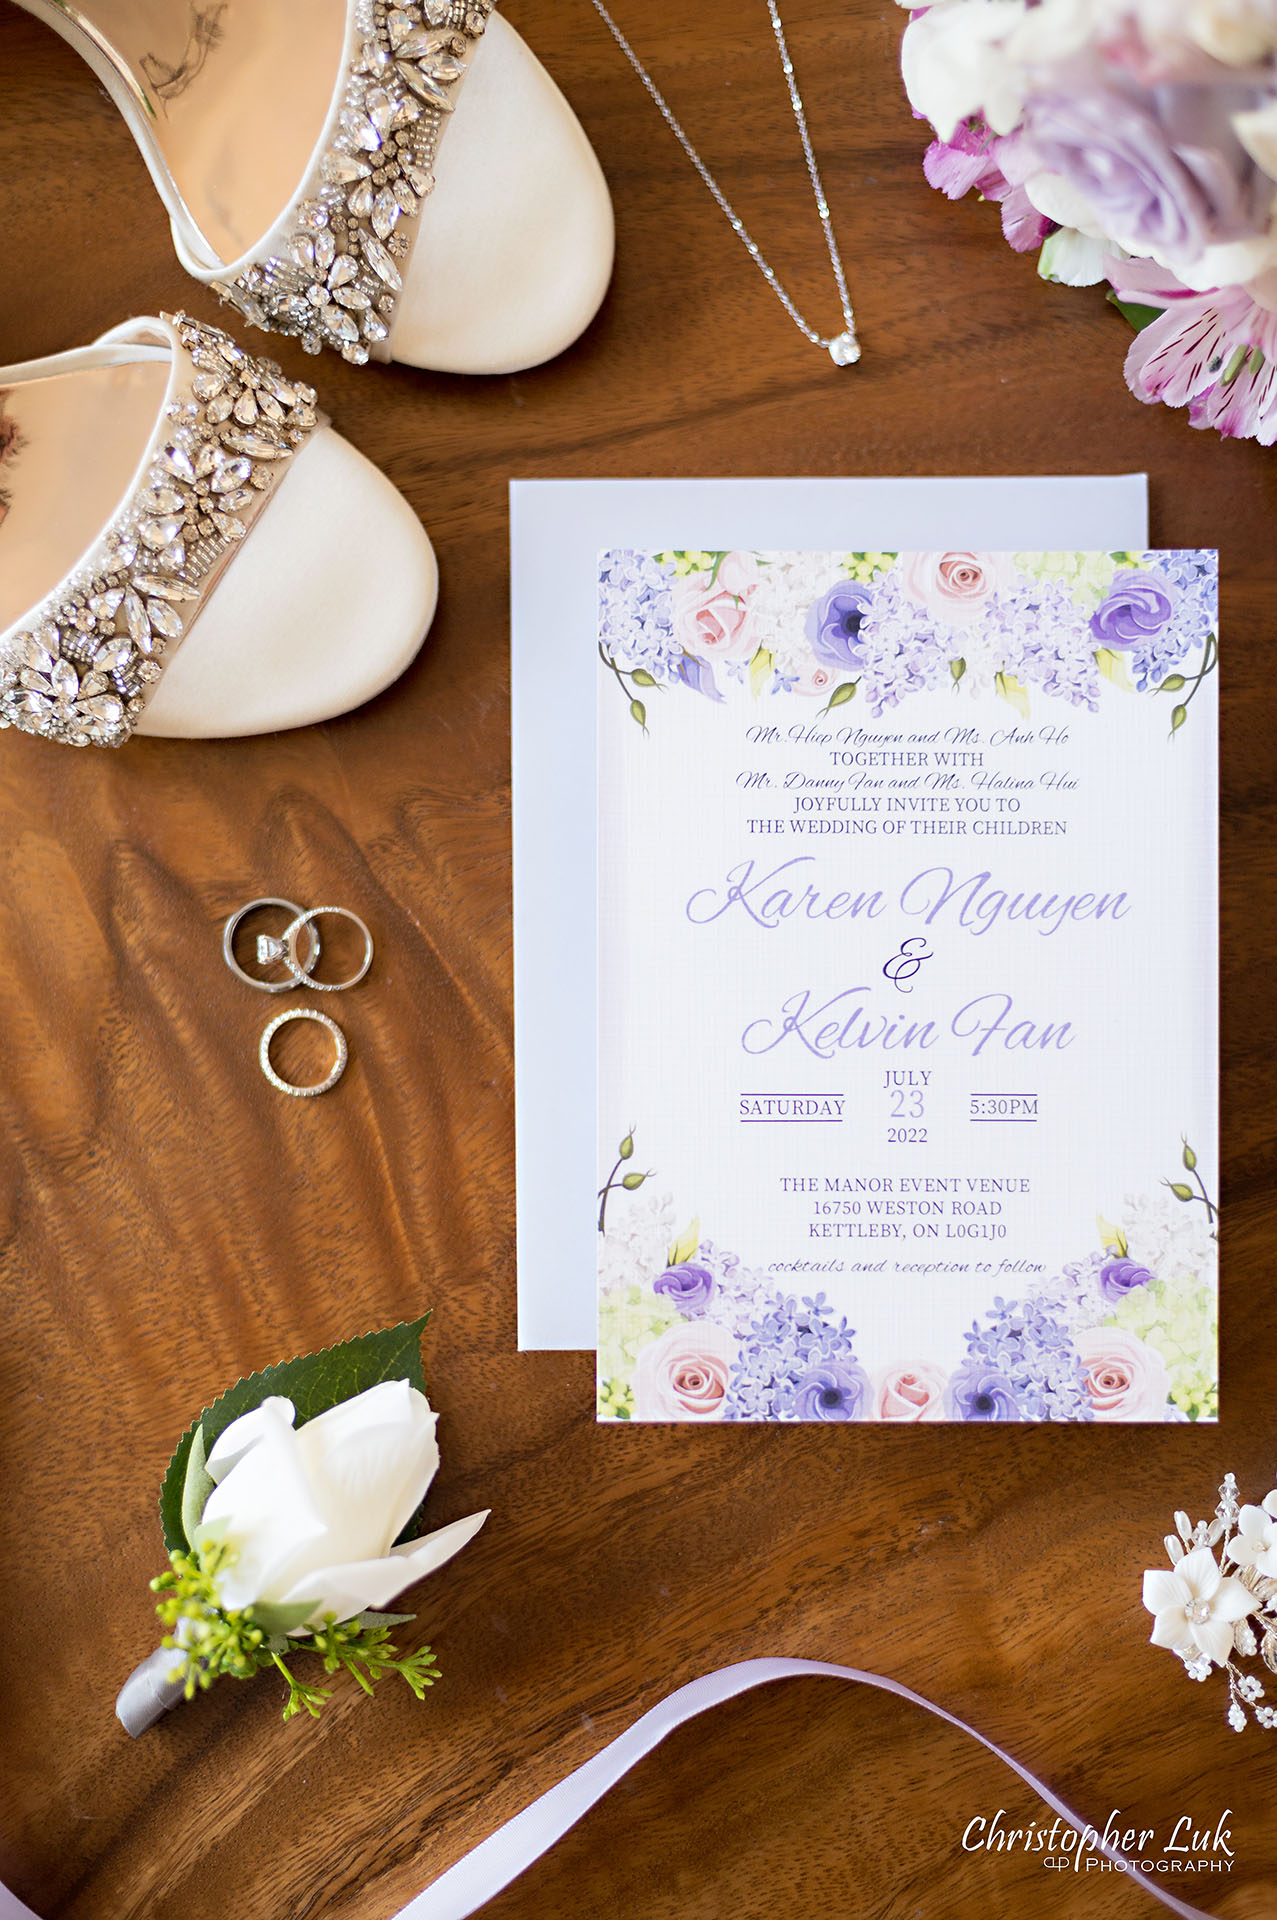 Toronto Wedding Photography Stationery Invitations Layflat Flatlay Details Bridal Shoes Bouquet Florals Crystal Hairpiece Rings Earrings Portrait